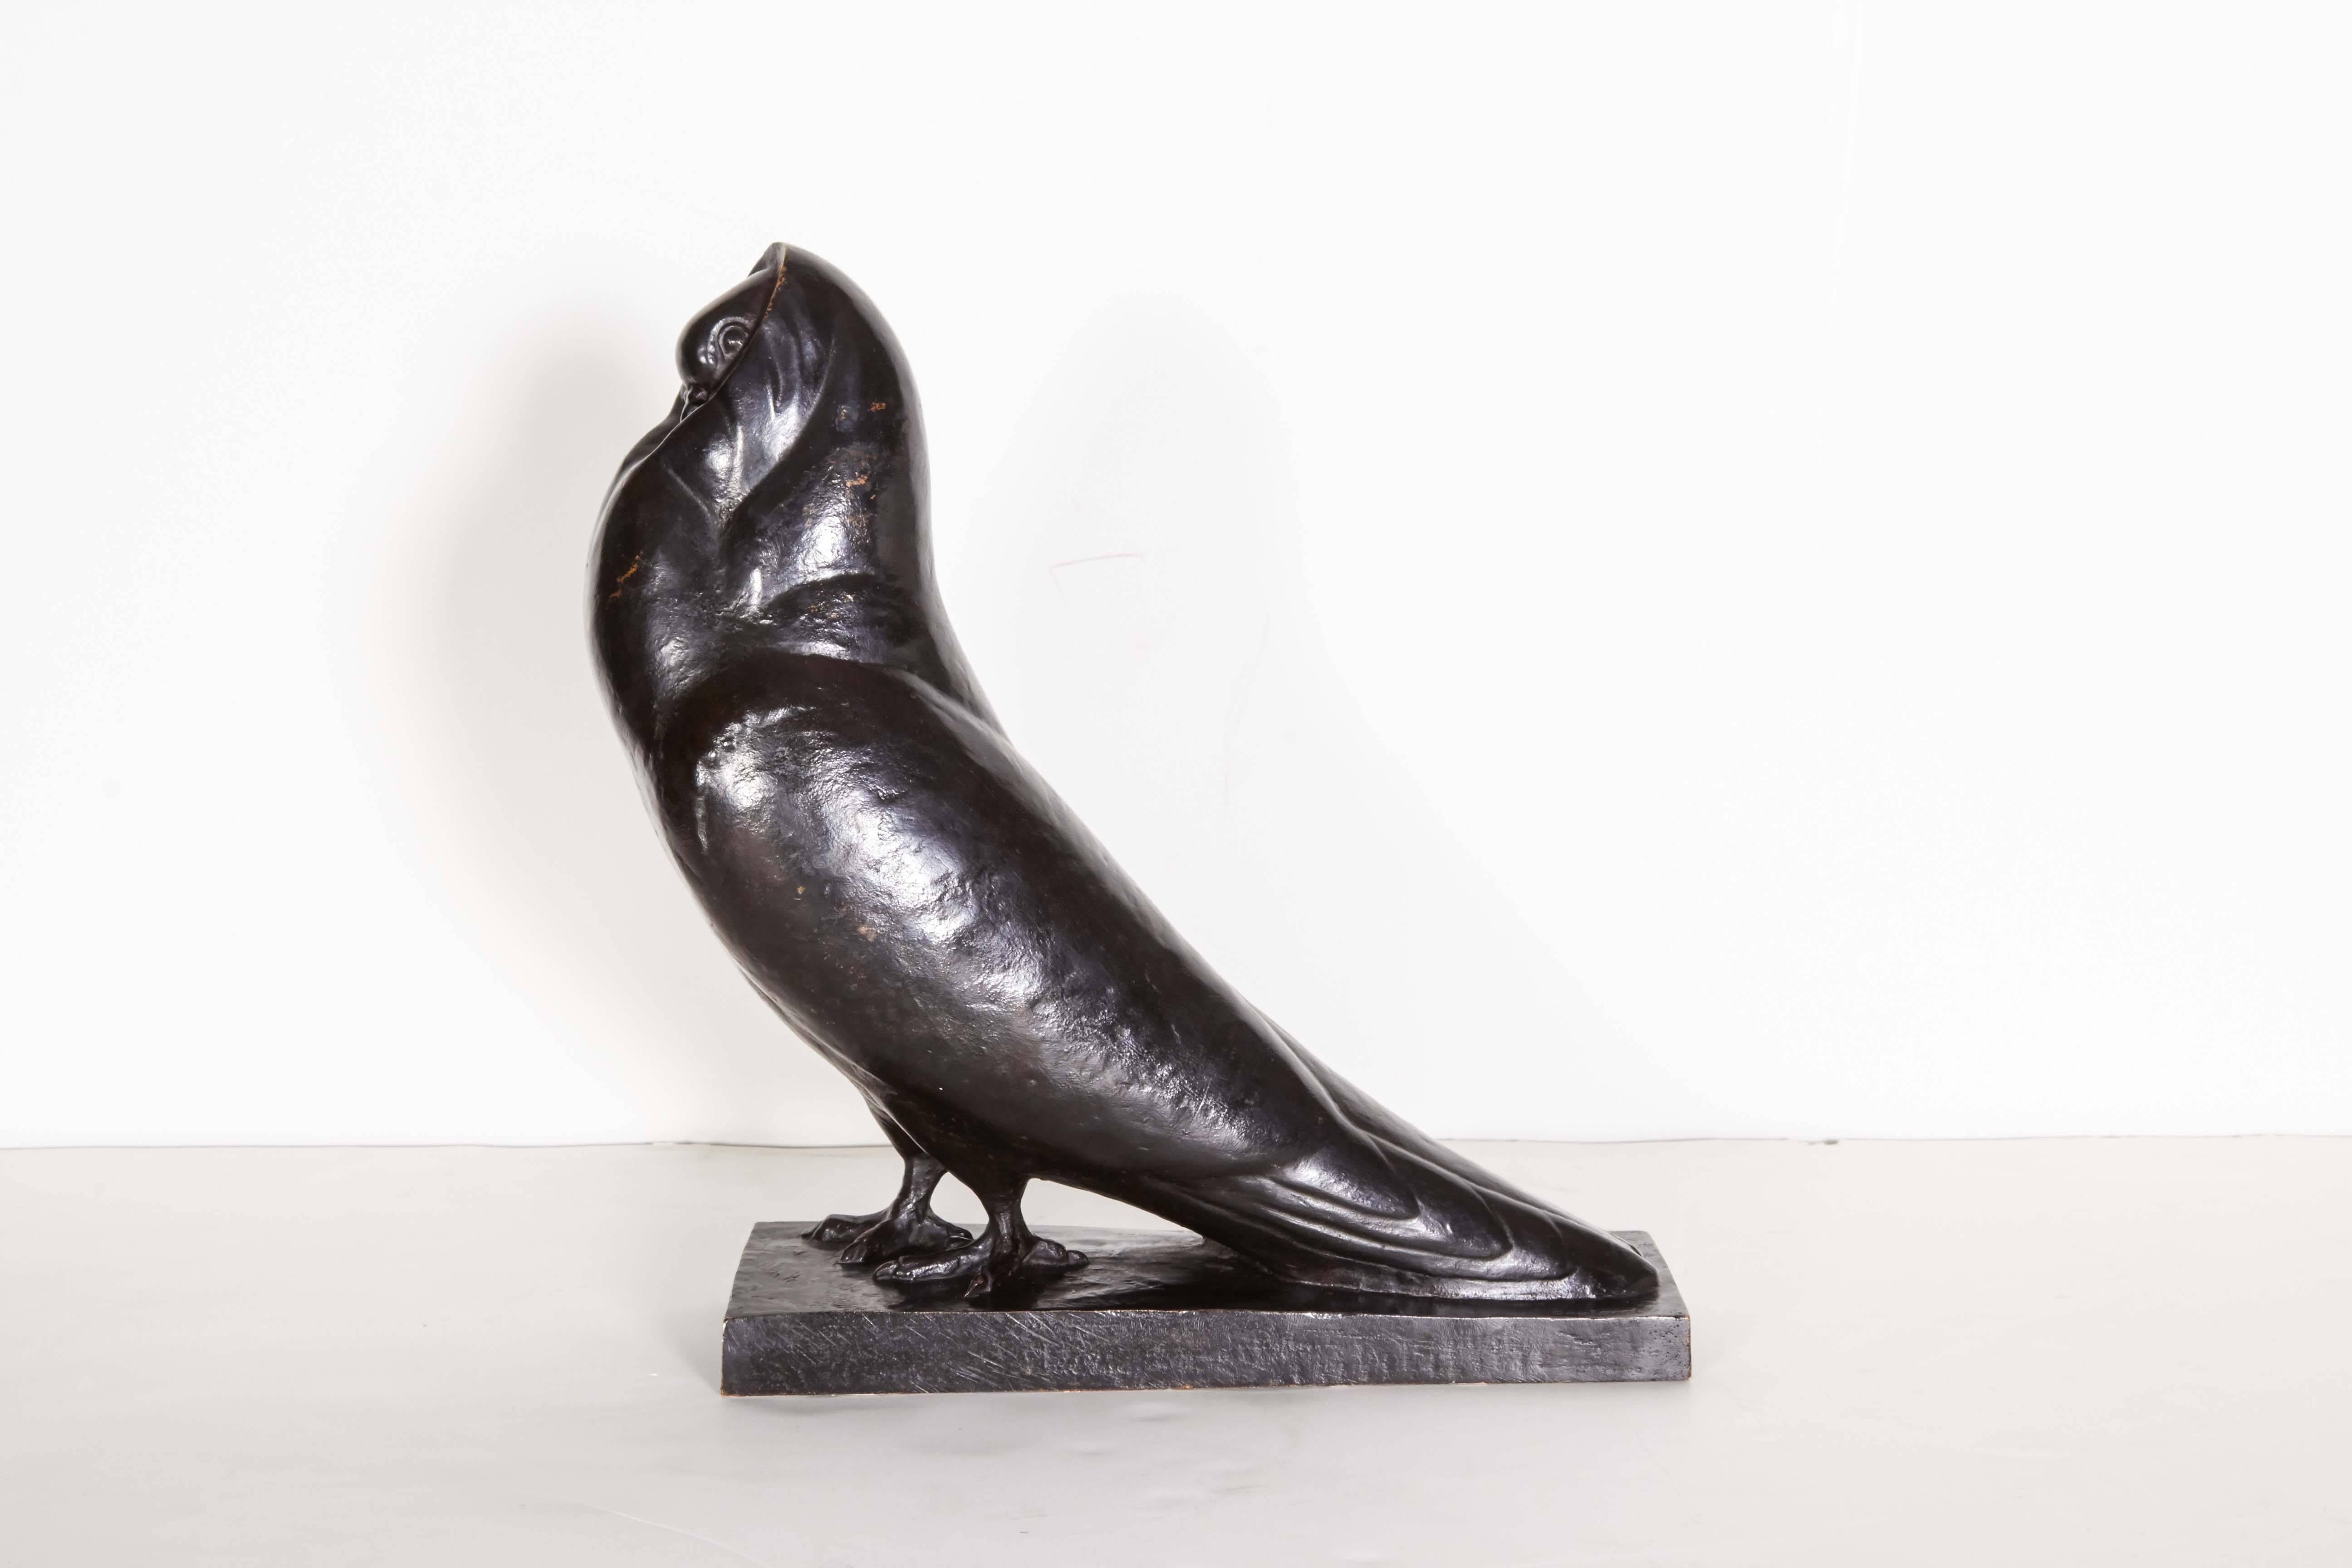 Highly stylized French modernist sculpture of a dove with elongated tail and rounded hood. Signed S. Boutarel .
 Born in Paris at the beginning of the 20th century, Simone Boutarel exhibited in the Paris salons from 1925 on. She won a silver medal